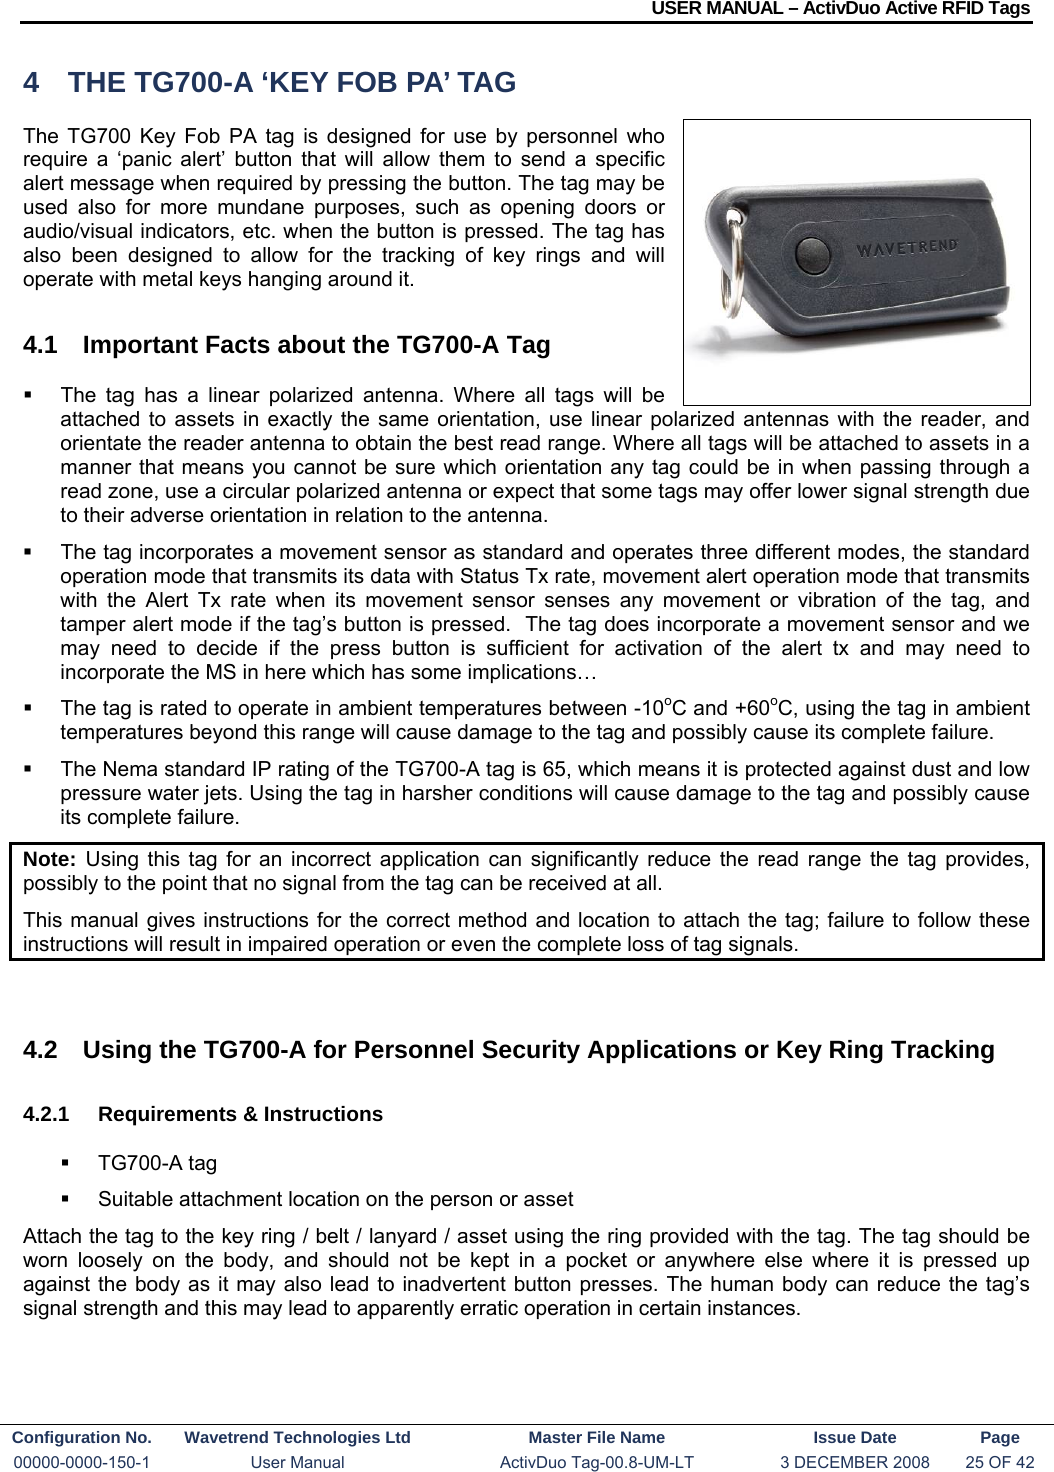 USER MANUAL – ActivDuo Active RFID Tags Configuration No.  Wavetrend Technologies Ltd  Master File Name   Issue Date  Page 00000-0000-150-1  User Manual  ActivDuo Tag-00.8-UM-LT  3 DECEMBER 2008  25 OF 42  4  THE TG700-A ‘KEY FOB PA’ TAG The TG700 Key Fob PA tag is designed for use by personnel who require a ‘panic alert’ button that will allow them to send a specific alert message when required by pressing the button. The tag may be used also for more mundane purposes, such as opening doors or audio/visual indicators, etc. when the button is pressed. The tag has also been designed to allow for the tracking of key rings and will operate with metal keys hanging around it. 4.1  Important Facts about the TG700-A Tag   The tag has a linear polarized antenna. Where all tags will be attached to assets in exactly the same orientation, use linear polarized antennas with the reader, and orientate the reader antenna to obtain the best read range. Where all tags will be attached to assets in a manner that means you cannot be sure which orientation any tag could be in when passing through a read zone, use a circular polarized antenna or expect that some tags may offer lower signal strength due to their adverse orientation in relation to the antenna.   The tag incorporates a movement sensor as standard and operates three different modes, the standard operation mode that transmits its data with Status Tx rate, movement alert operation mode that transmits with the Alert Tx rate when its movement sensor senses any movement or vibration of the tag, and tamper alert mode if the tag’s button is pressed.  The tag does incorporate a movement sensor and we may need to decide if the press button is sufficient for activation of the alert tx and may need to incorporate the MS in here which has some implications…   The tag is rated to operate in ambient temperatures between -10oC and +60oC, using the tag in ambient temperatures beyond this range will cause damage to the tag and possibly cause its complete failure.   The Nema standard IP rating of the TG700-A tag is 65, which means it is protected against dust and low pressure water jets. Using the tag in harsher conditions will cause damage to the tag and possibly cause its complete failure. Note:  Using this tag for an incorrect application can significantly reduce the read range the tag provides, possibly to the point that no signal from the tag can be received at all. This manual gives instructions for the correct method and location to attach the tag; failure to follow these instructions will result in impaired operation or even the complete loss of tag signals.   4.2  Using the TG700-A for Personnel Security Applications or Key Ring Tracking 4.2.1  Requirements &amp; Instructions  TG700-A tag   Suitable attachment location on the person or asset Attach the tag to the key ring / belt / lanyard / asset using the ring provided with the tag. The tag should be worn loosely on the body, and should not be kept in a pocket or anywhere else where it is pressed up against the body as it may also lead to inadvertent button presses. The human body can reduce the tag’s signal strength and this may lead to apparently erratic operation in certain instances.  